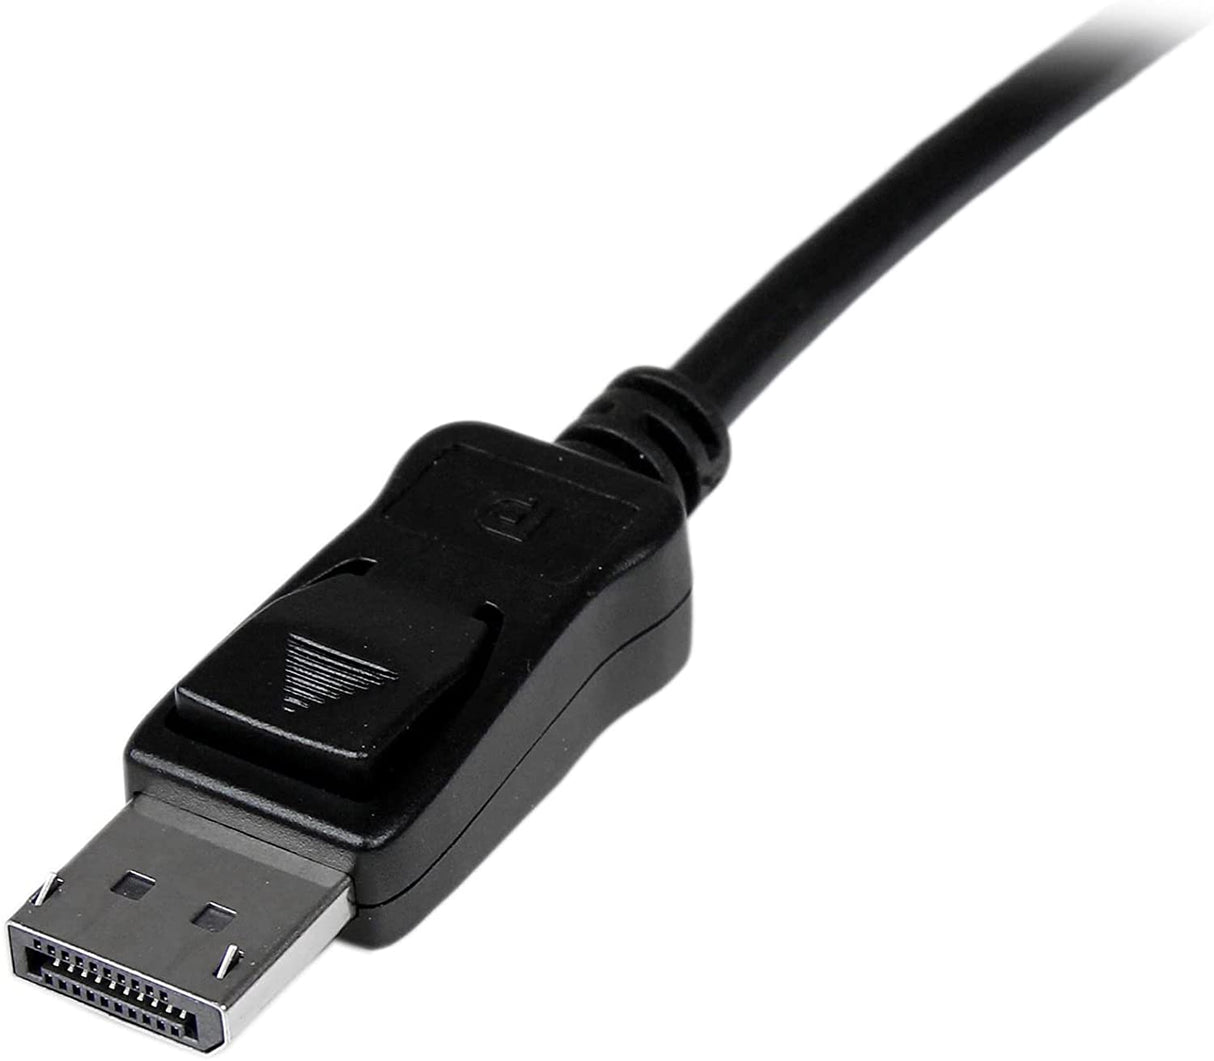 StarTech.com 50ft (15m) Active DisplayPort Cable - 4K Ultra HD DisplayPort Cable - Long DP to DP Cable for Projector/Monitor - DP Video/Display Cord - Latching DP Connectors (DISPL15MA) 50 ft/15.2 m